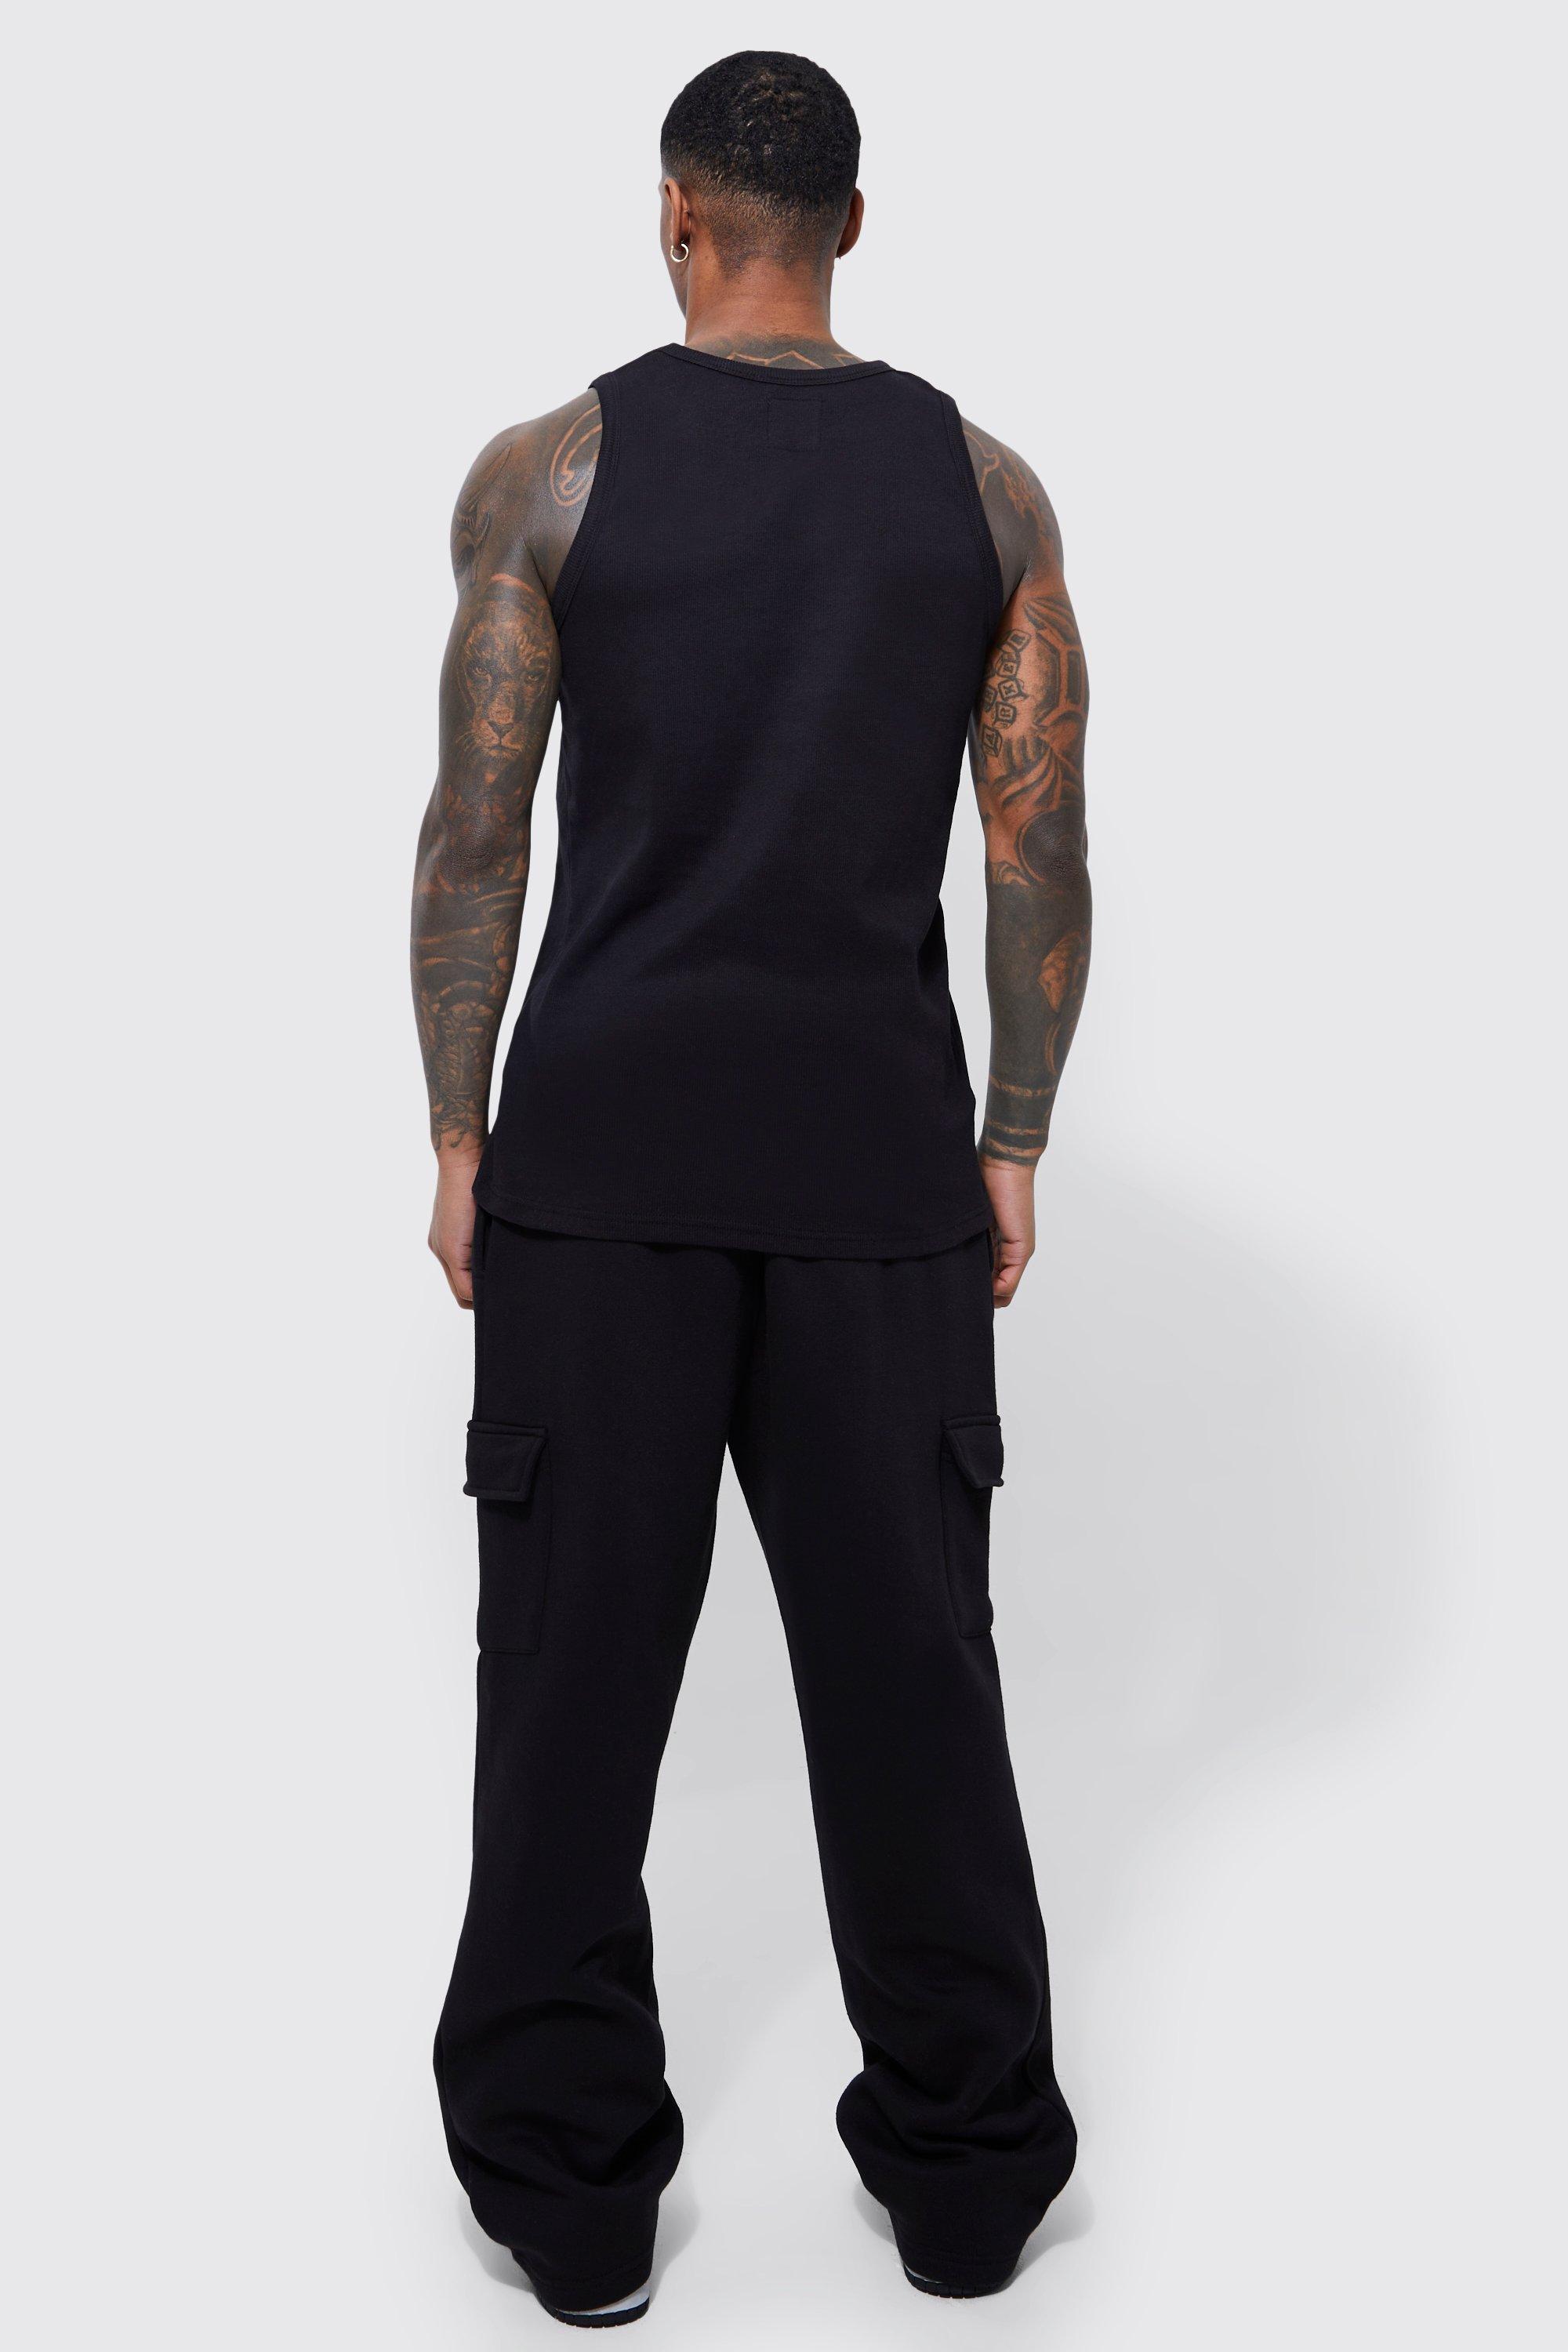 Ribbed Vest In Black, Tailored Athlete Shirts